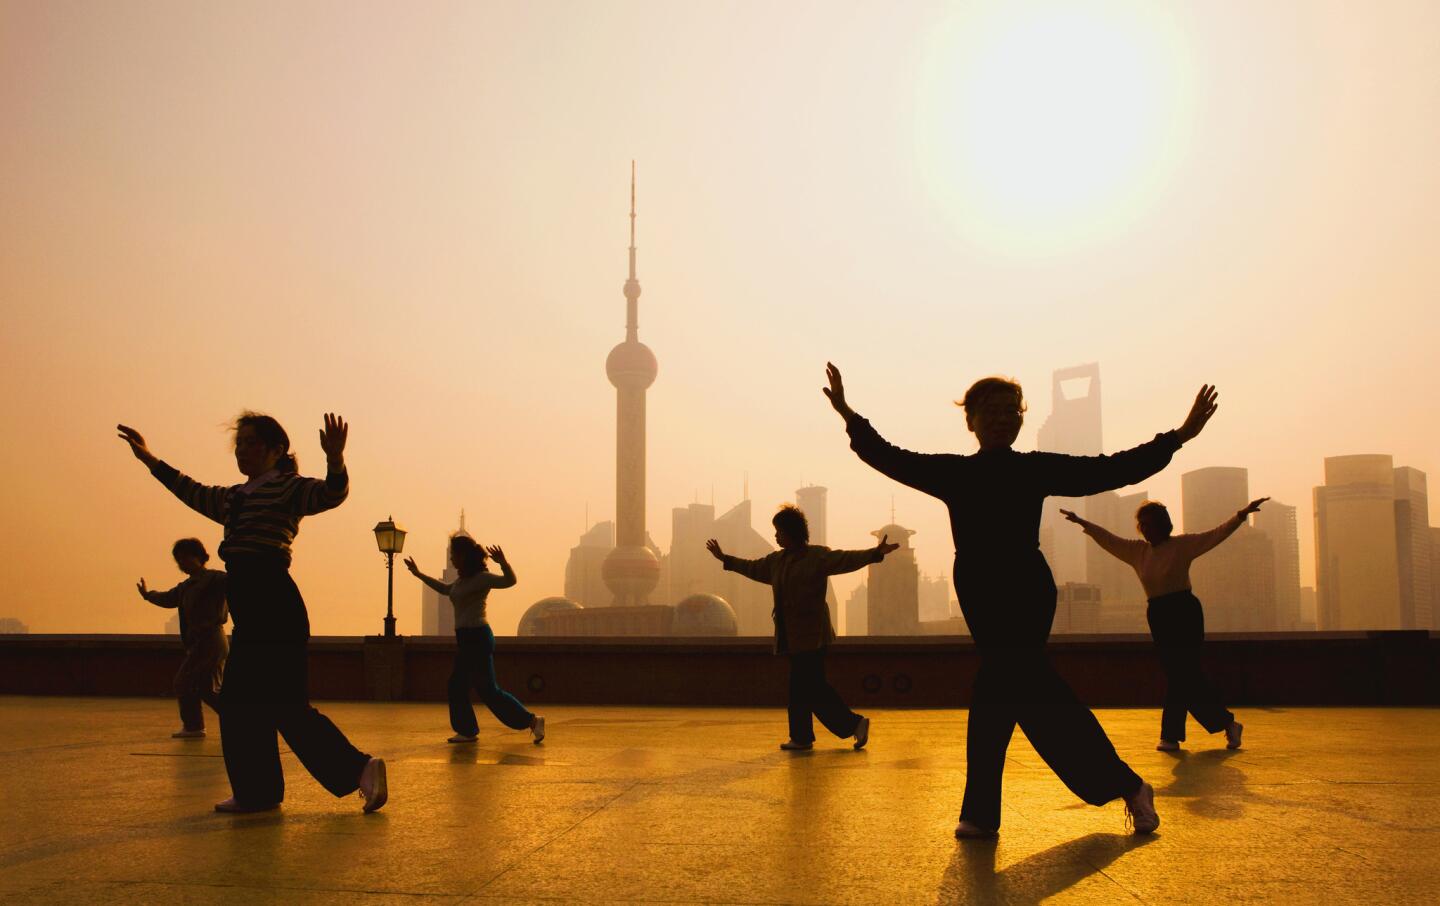 People gather to practice movements on the Bund, with the Shanghai skyline in the background.